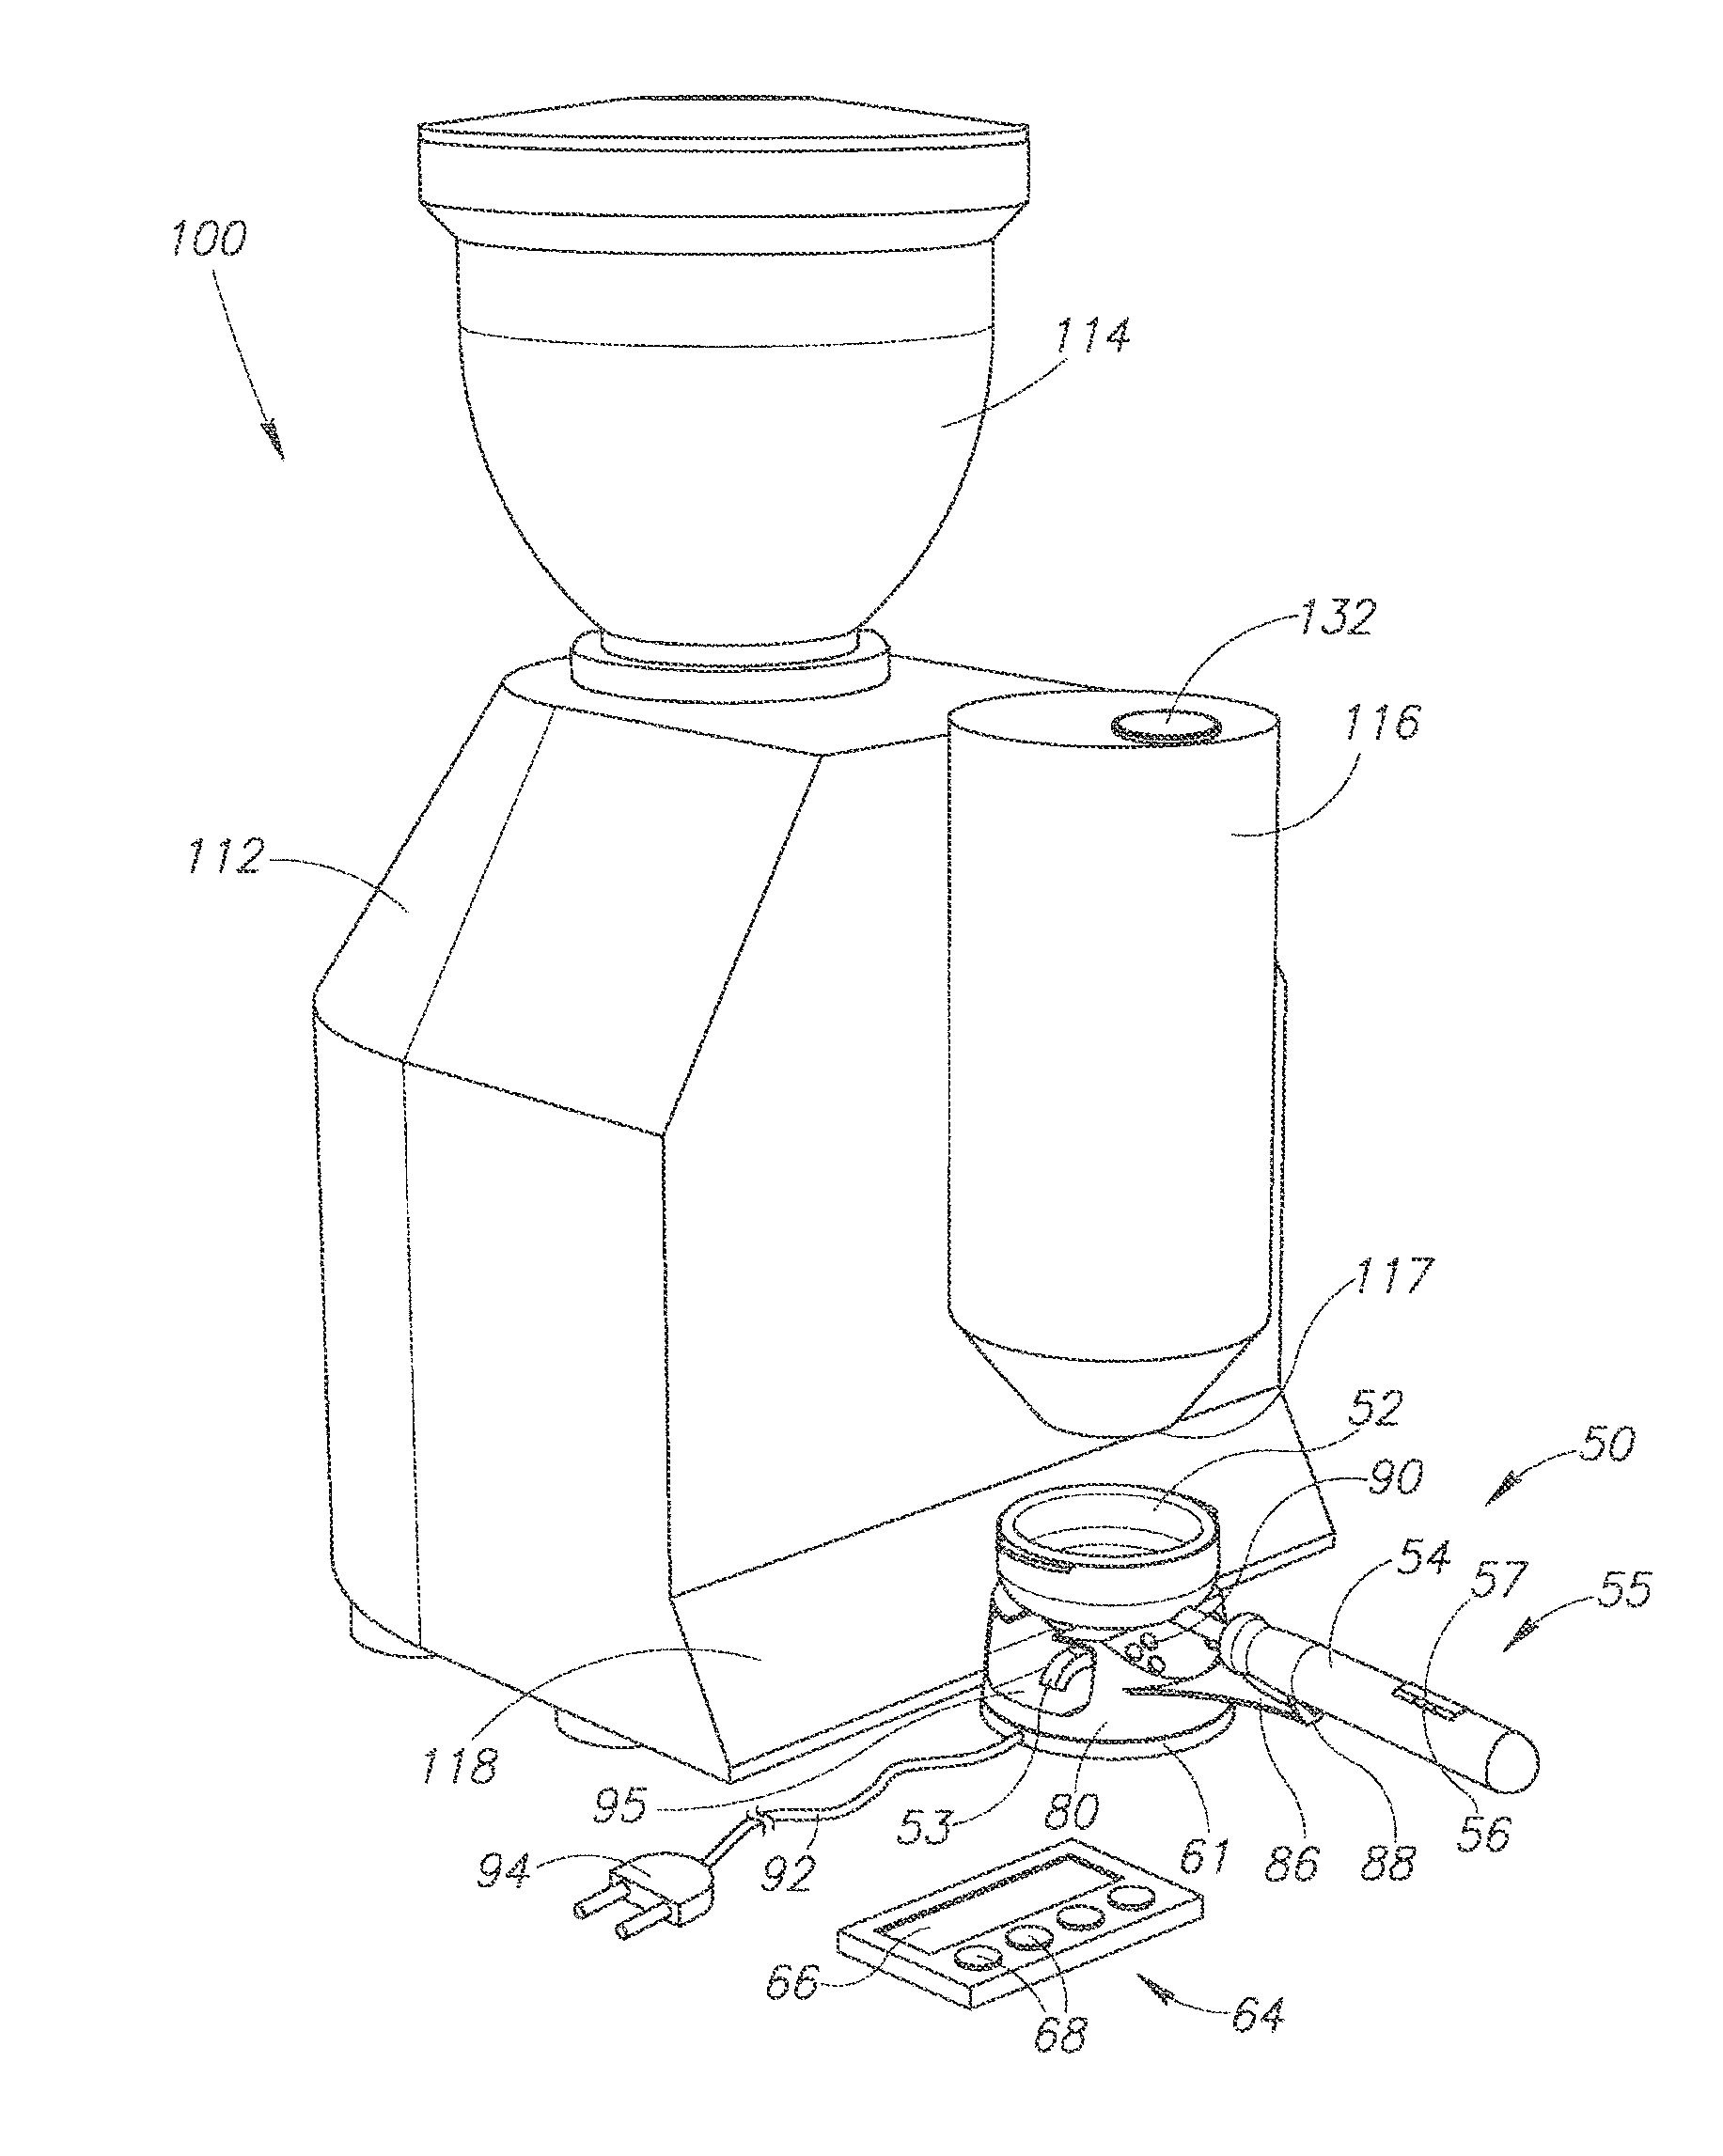 Apparatus to control the dispensing of a precise amount of ground coffee into an espresso portafilter basket